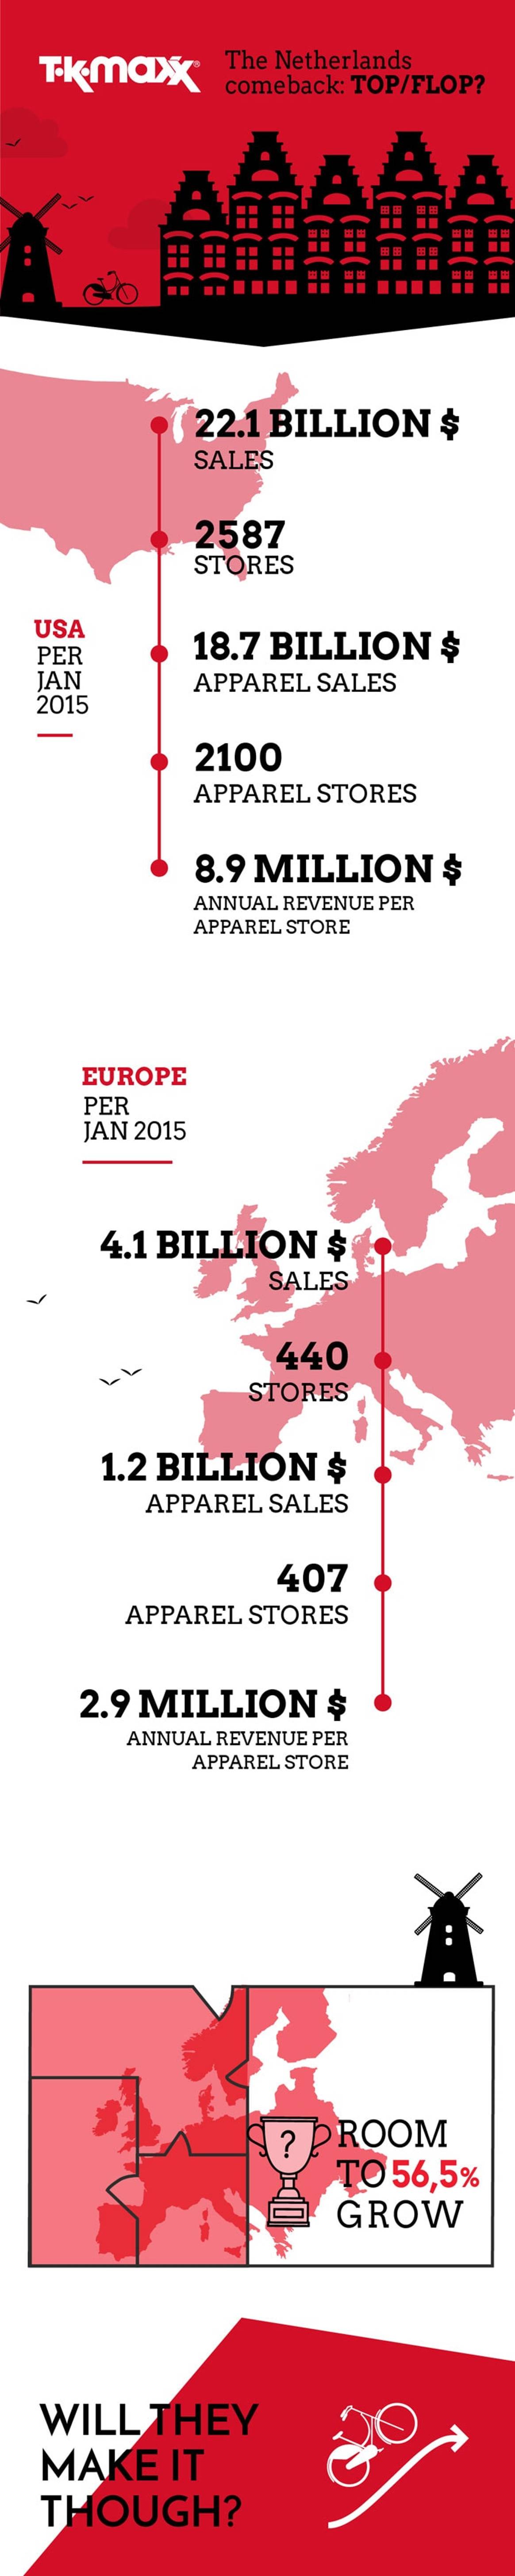 Infographic - Will TK Maxx's return to the Benelux be a top or flop?